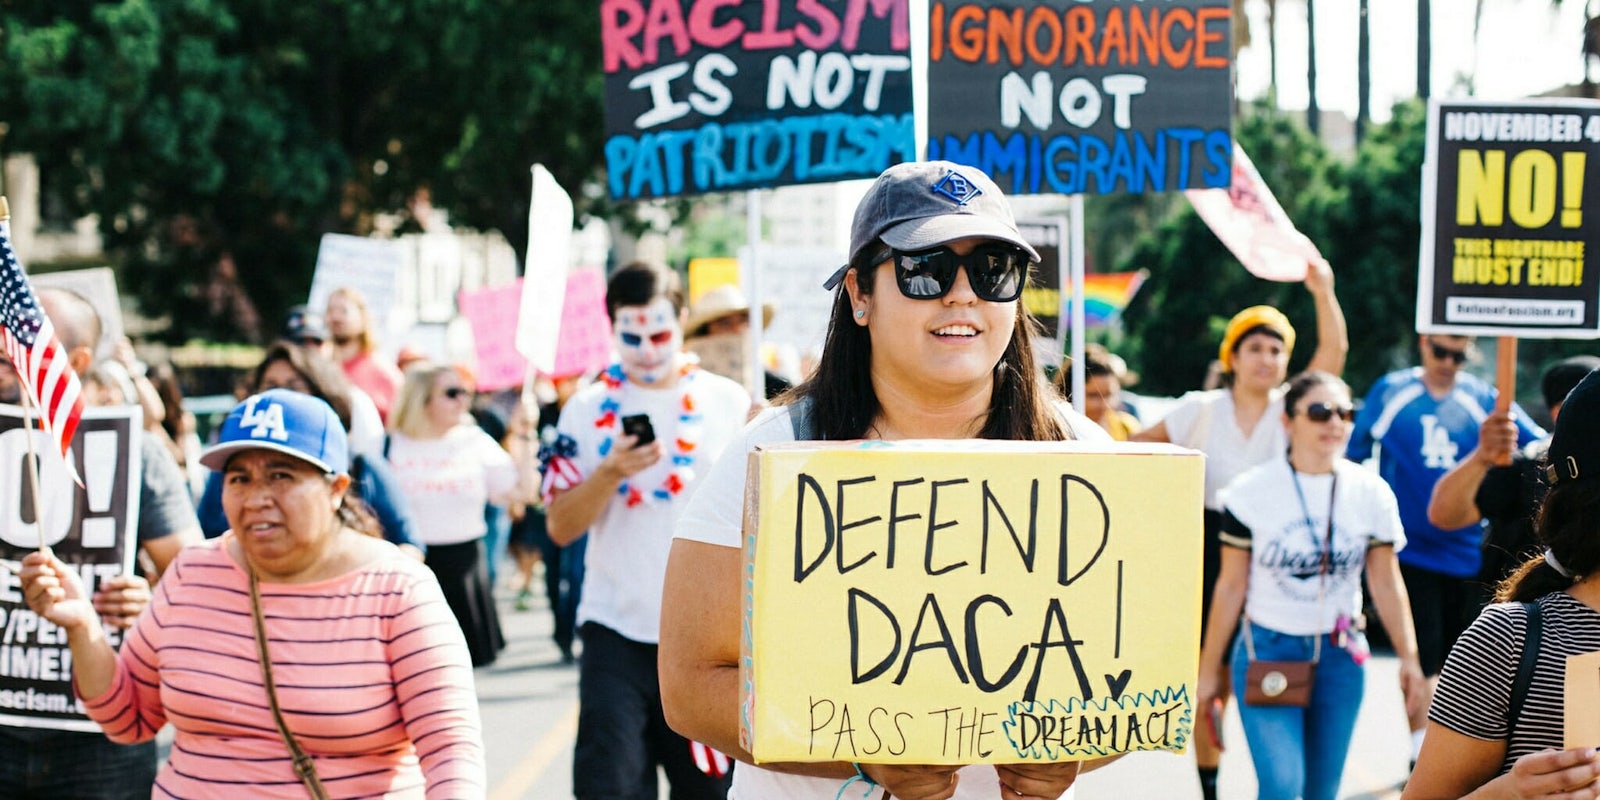 Protesters march for Dreamers after President Trump rescinds DACA.